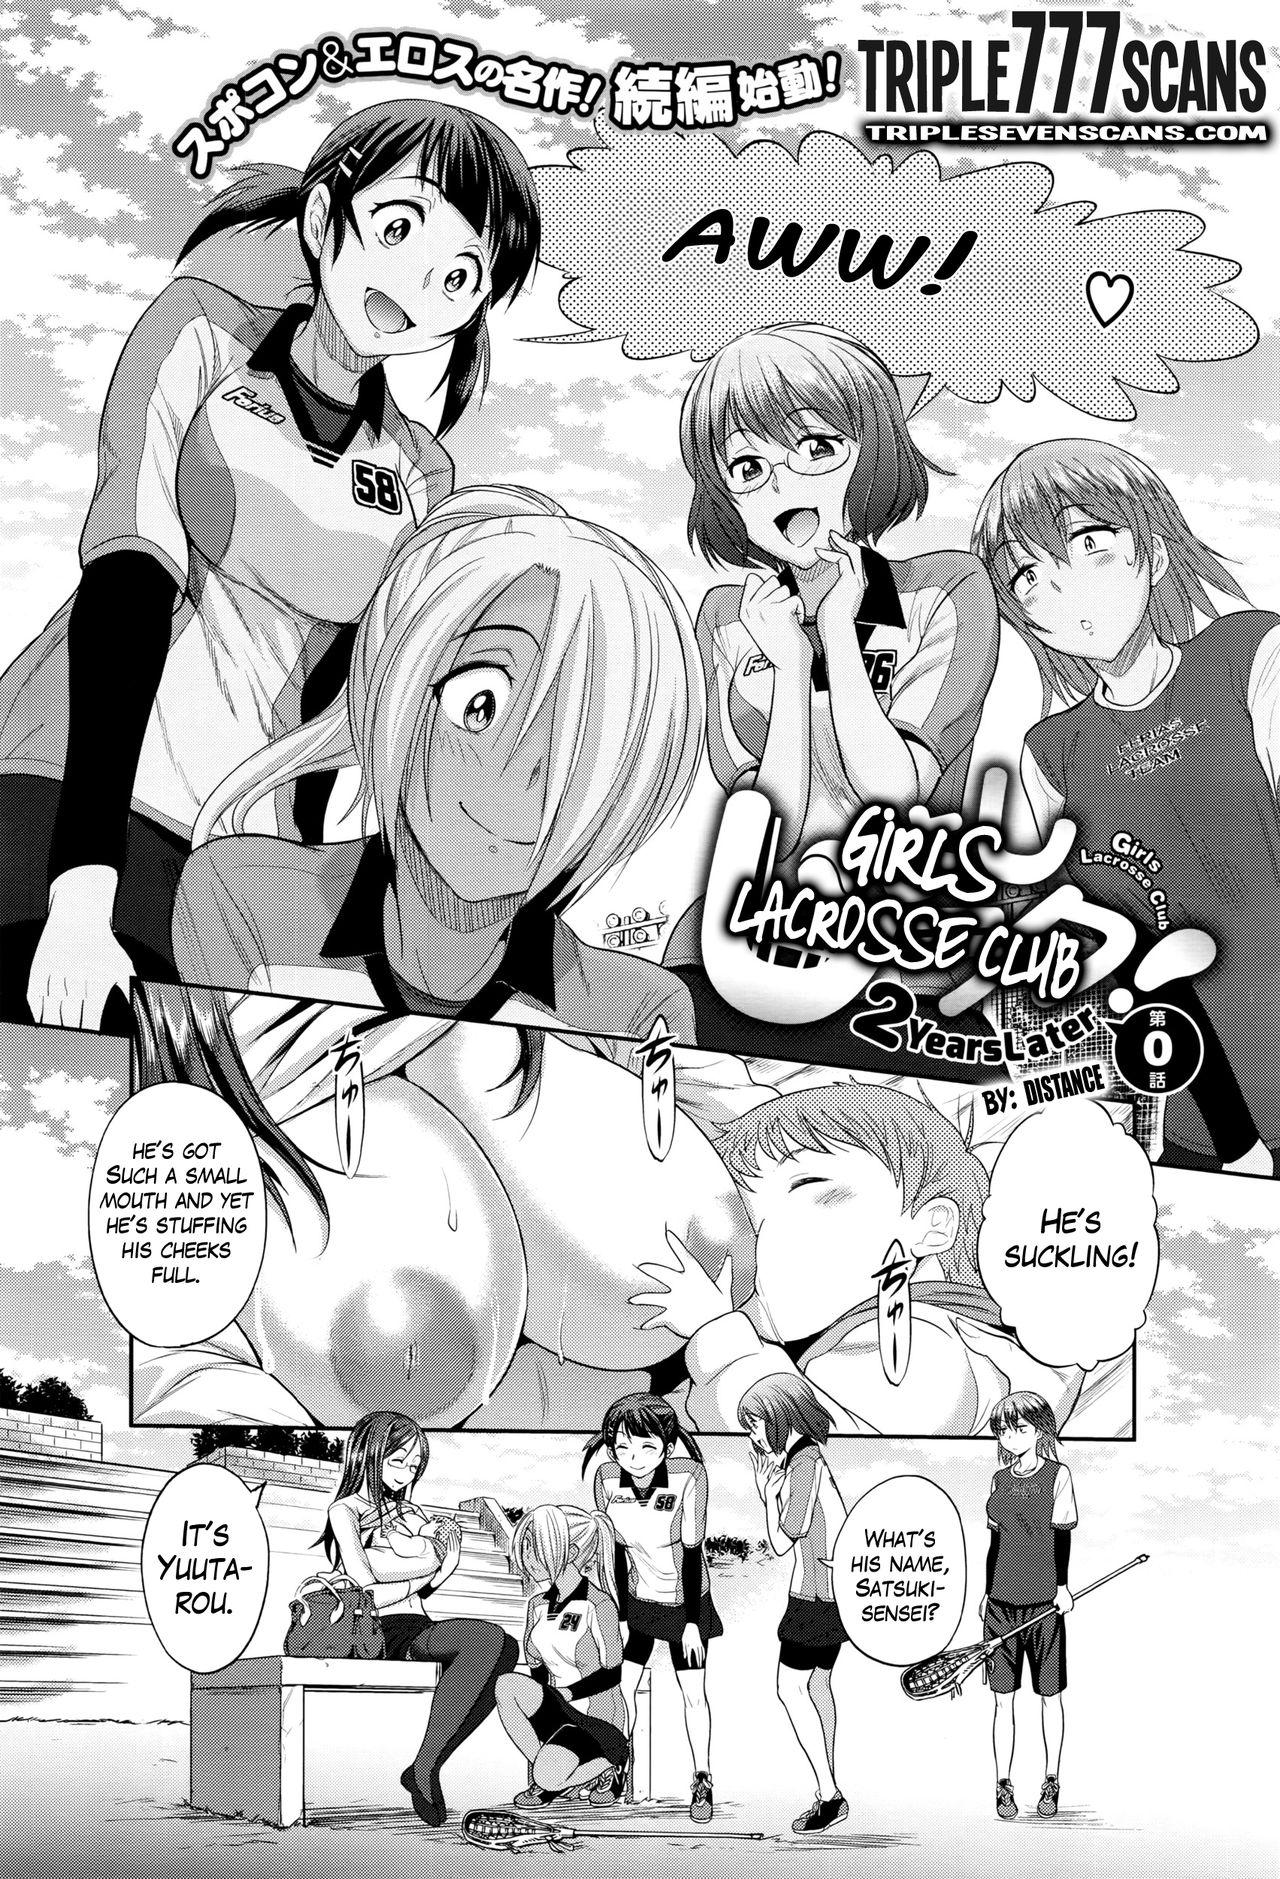 [DISTANCE] Joshi Lacu! - Girls Lacrosse Club ~2 Years Later~ Ch. 0 (COMIC ExE 01) [English] [TripleSevenScans] 1